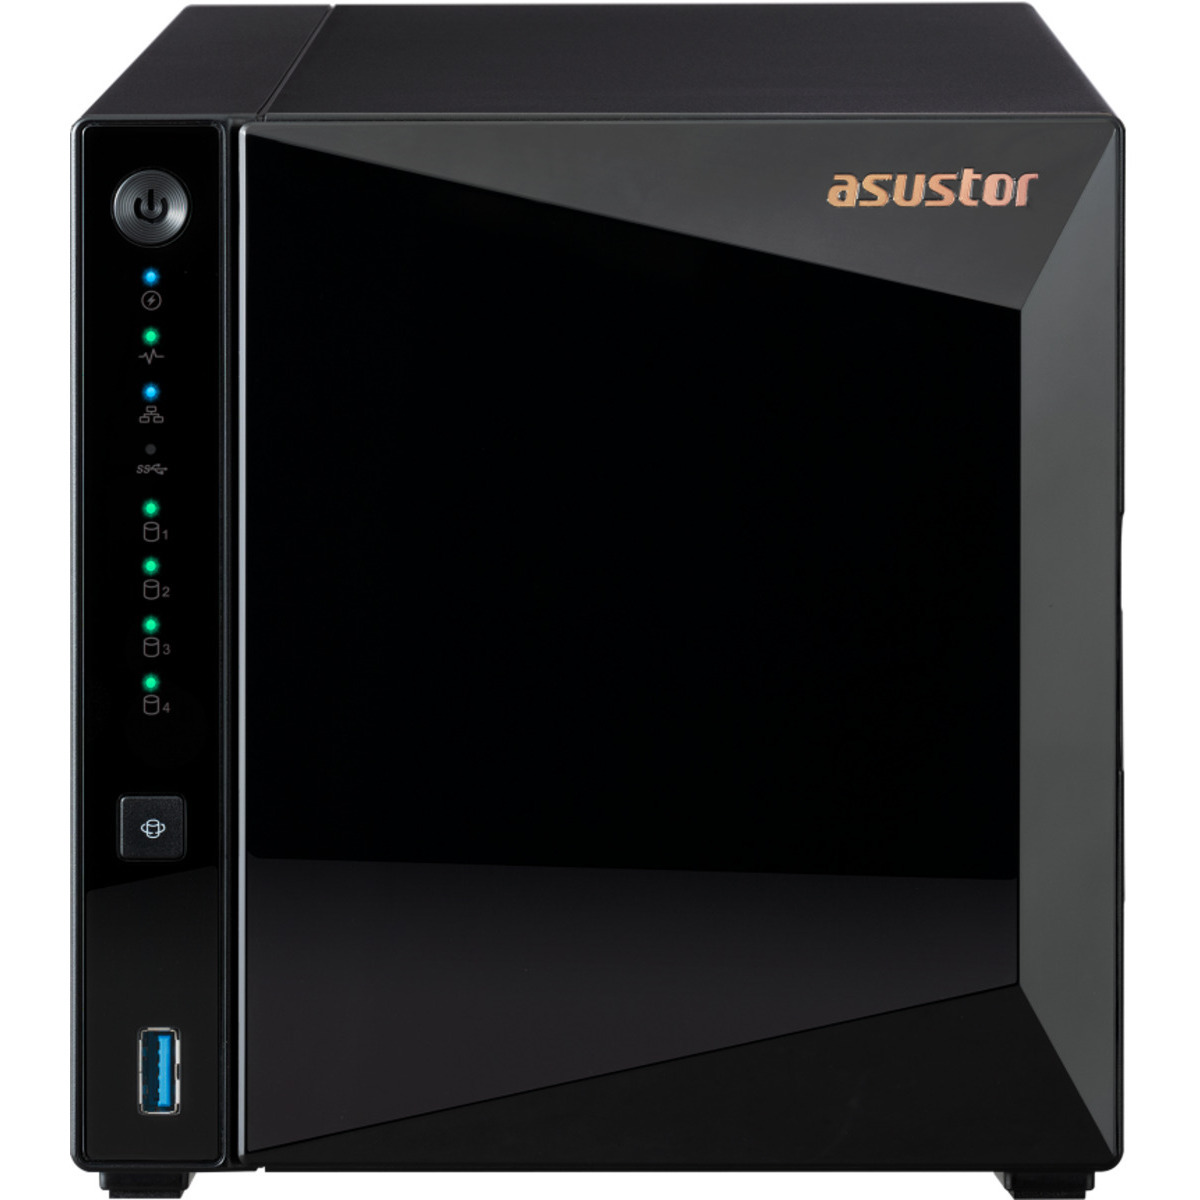 buy $956 ASUSTOR DRIVESTOR 4 Pro AS3304T 32tb Desktop NAS - Network Attached Storage Device 4x8000gb Toshiba Enterprise Capacity MG08ADA800E 3.5 7200rpm SATA 6Gb/s HDD ENTERPRISE Class Drives Installed - Burn-In Tested - ON SALE - nas headquarters buy network attached storage server device das new raid-5 free shipping usa DRIVESTOR 4 Pro AS3304T